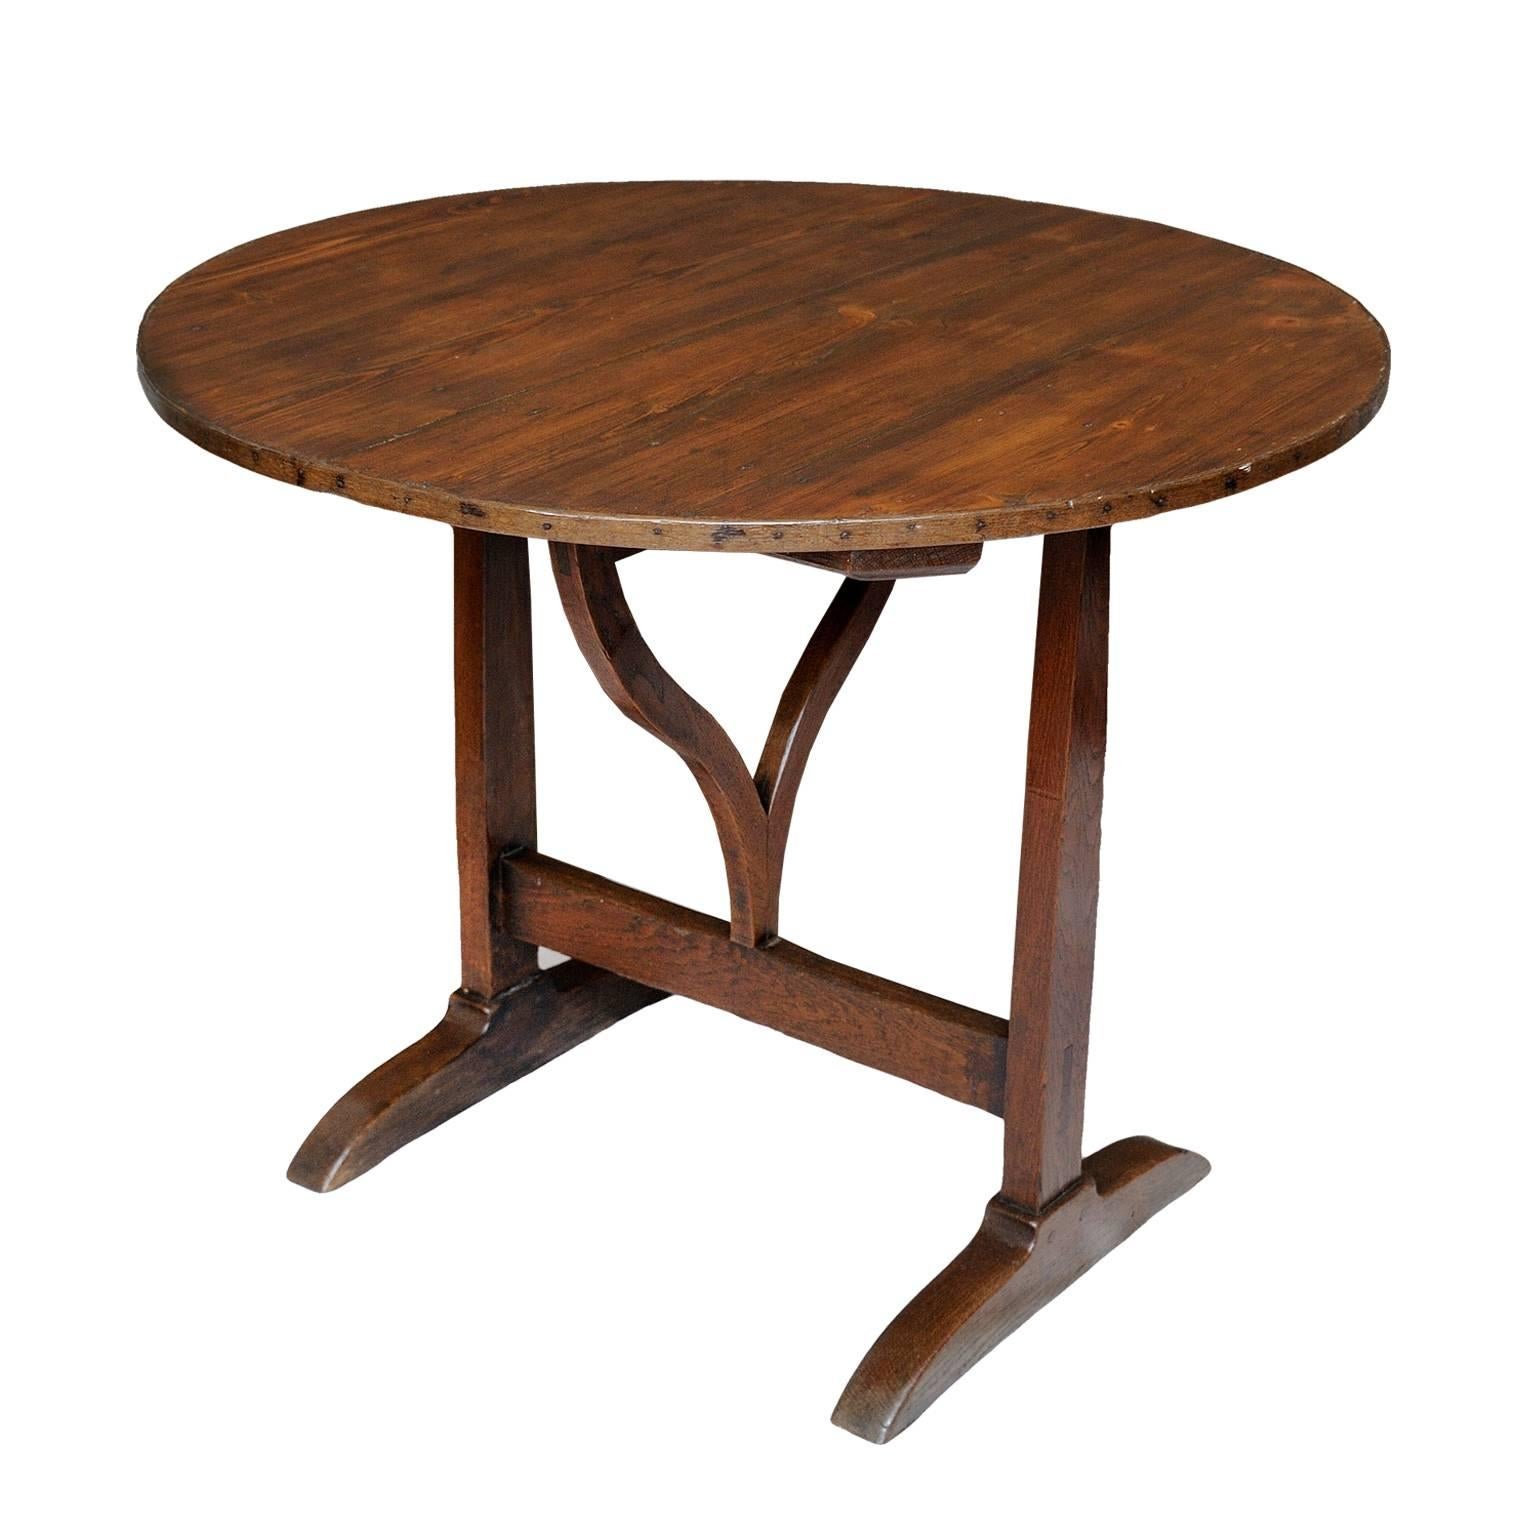 Mid-19th Century French Oak and Pine Wine Tasting Table, circa 1840